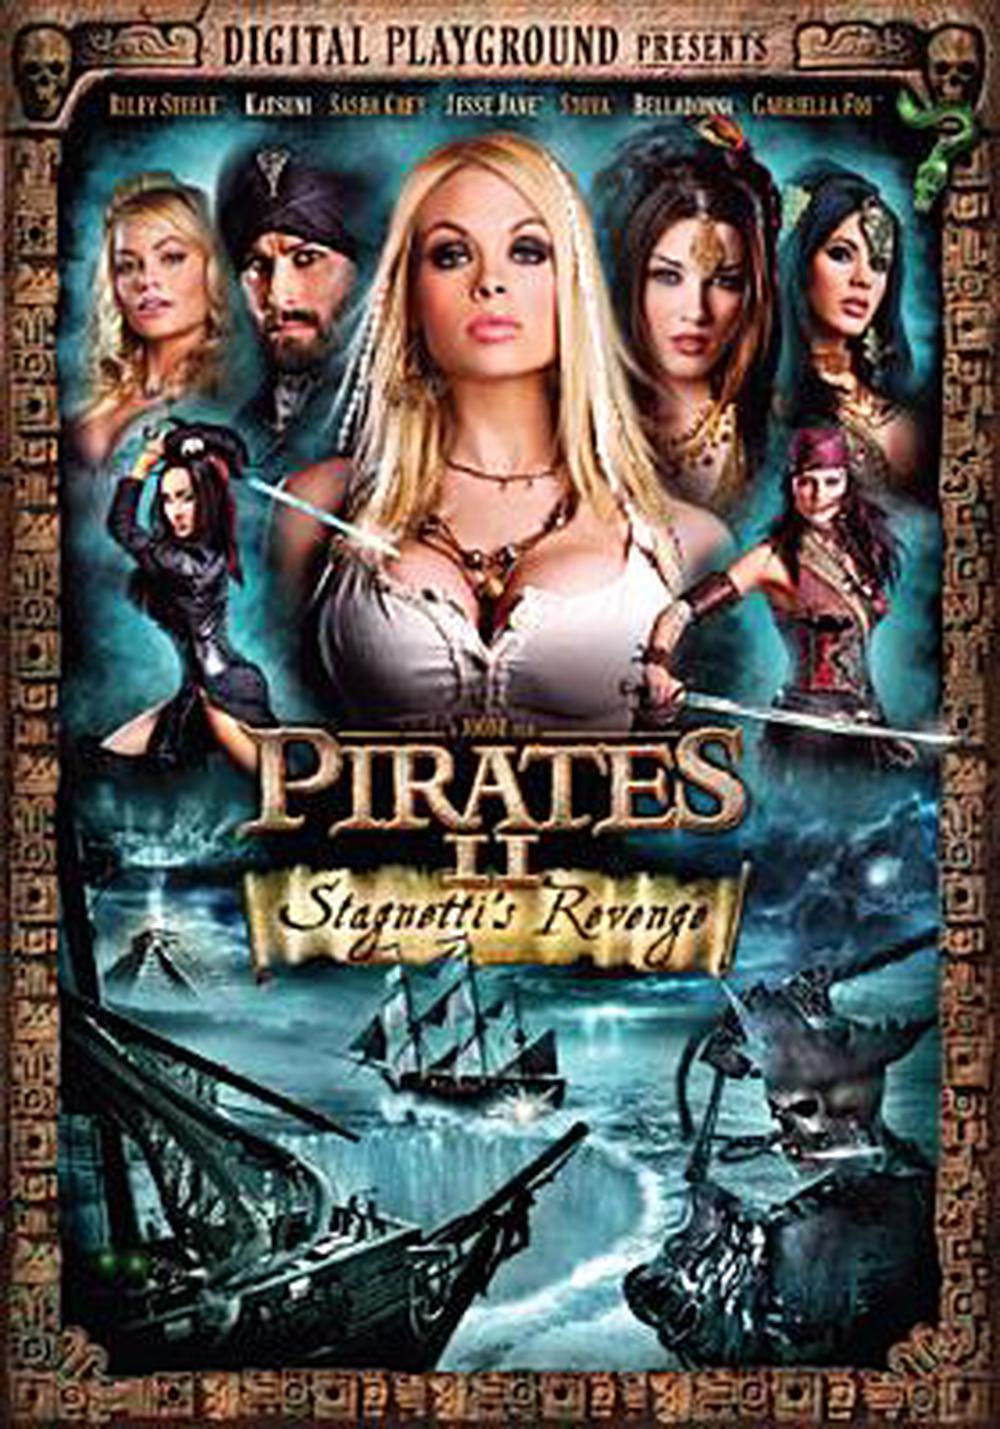 Pirates 2005 Movie Download - Pirates 2 Download Movie Free Direct Download Siberian Mouse Mm 30 ...